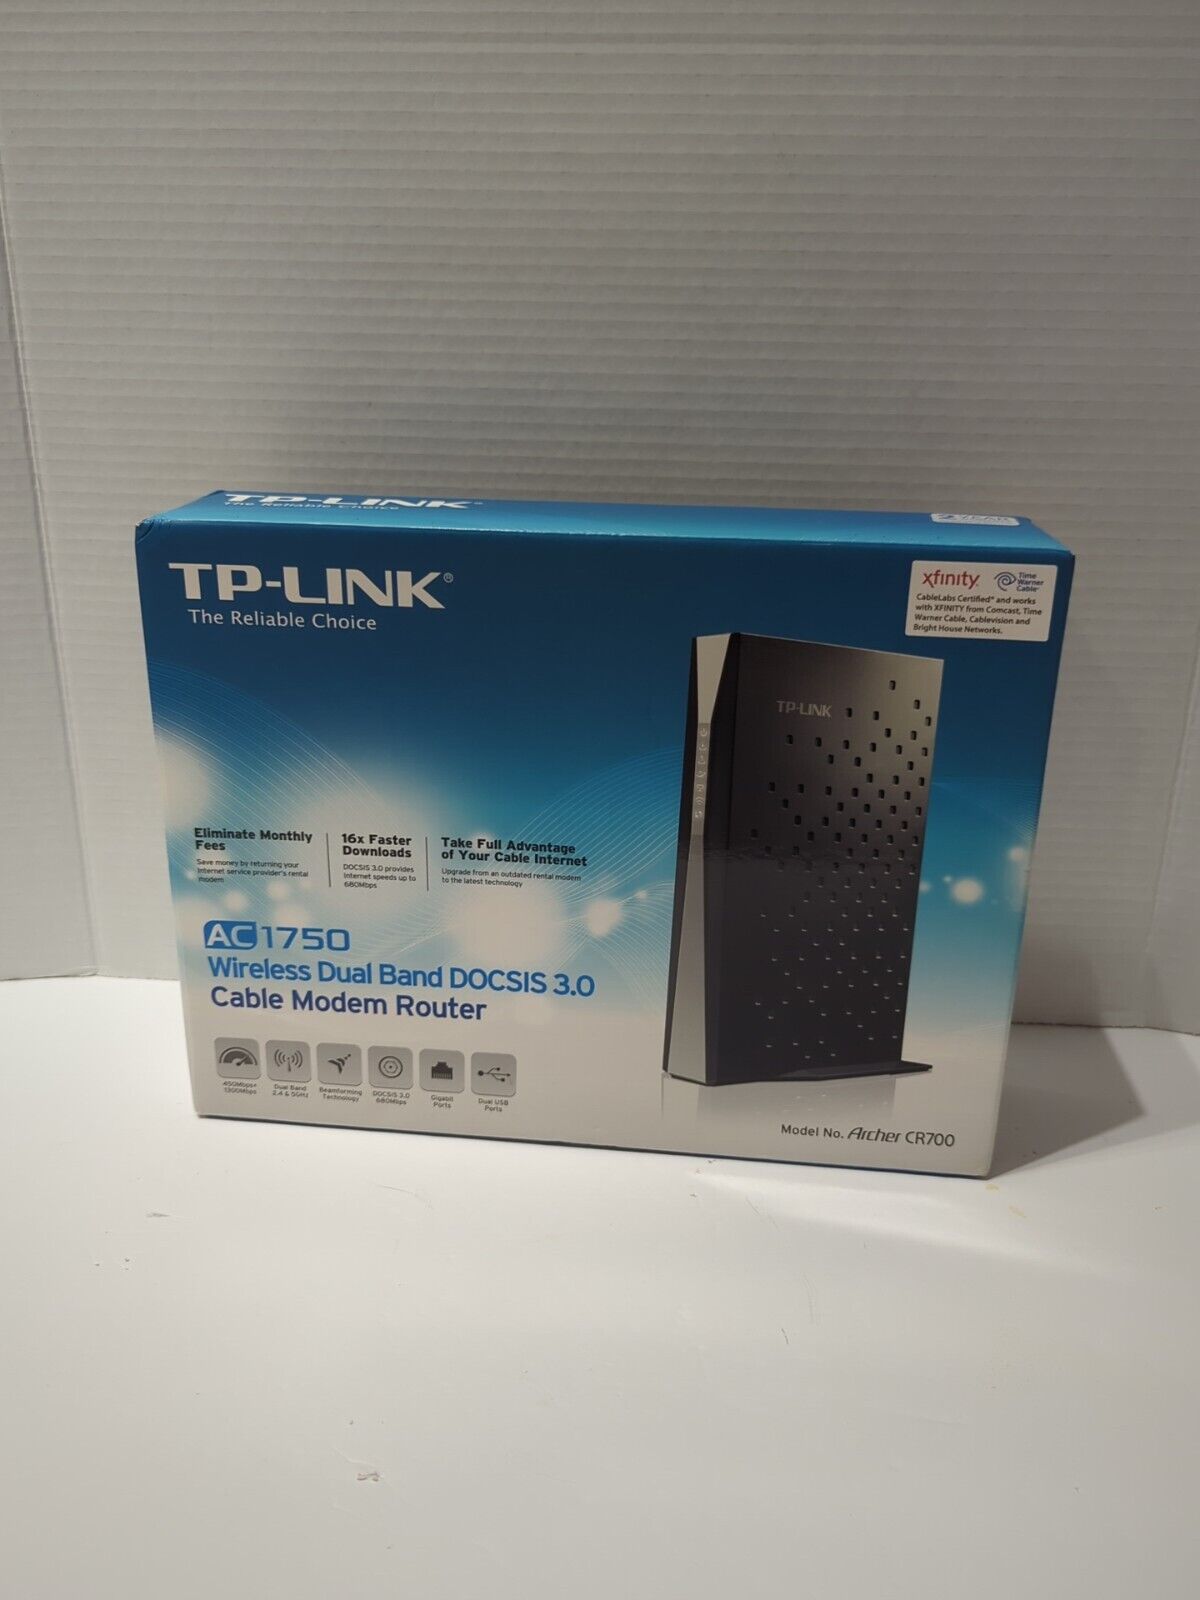 New TP-Link AC1750 Wireless Dual Band DOCSIS 3.0 Cable Modem Router Archer CR700